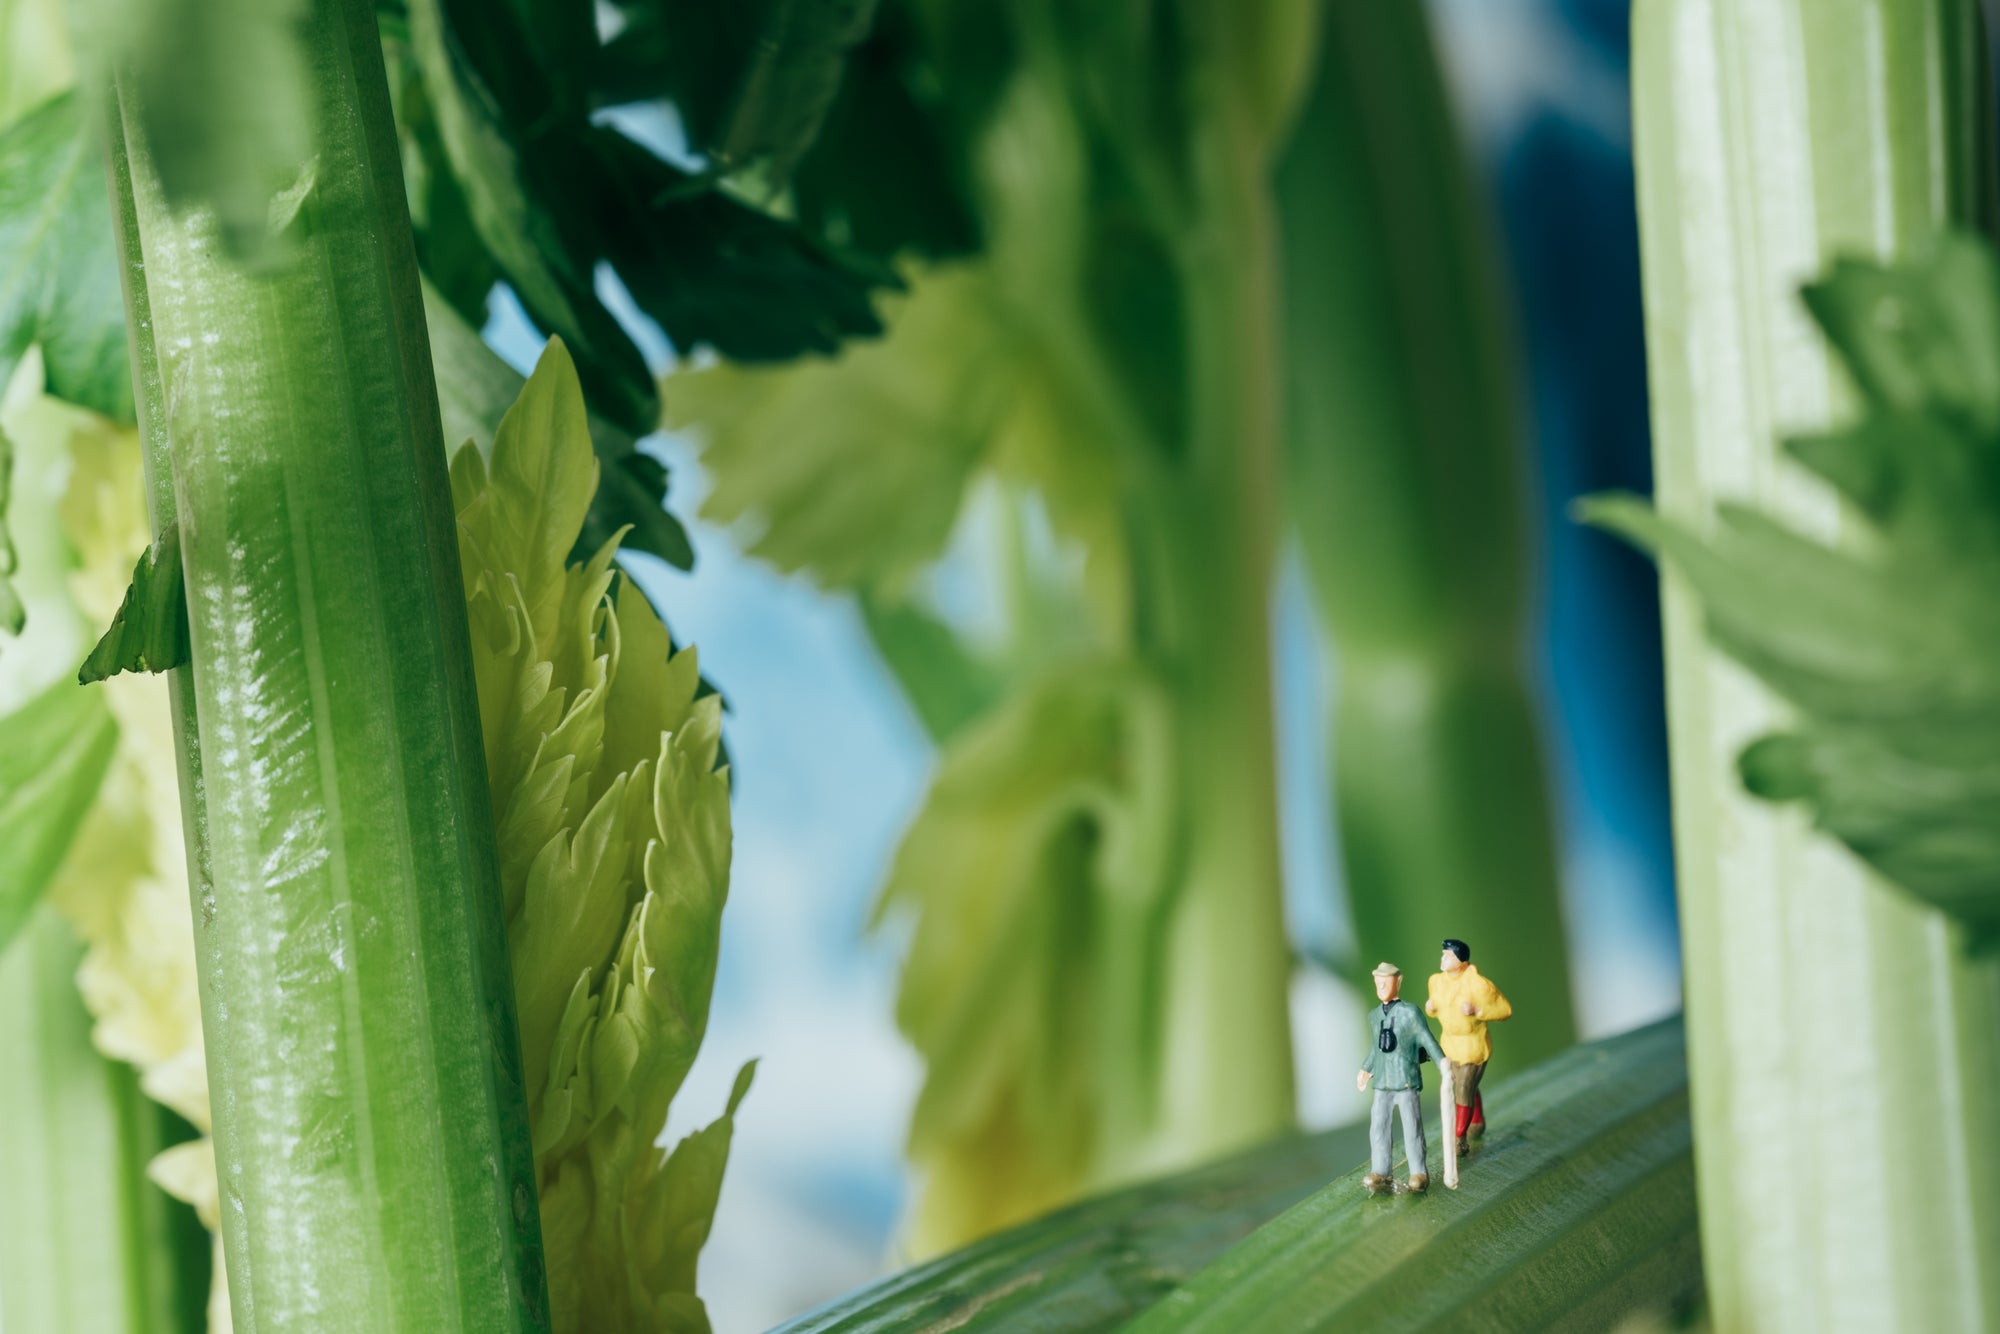 two person figurines standing on stalks of celery made to look like a forest